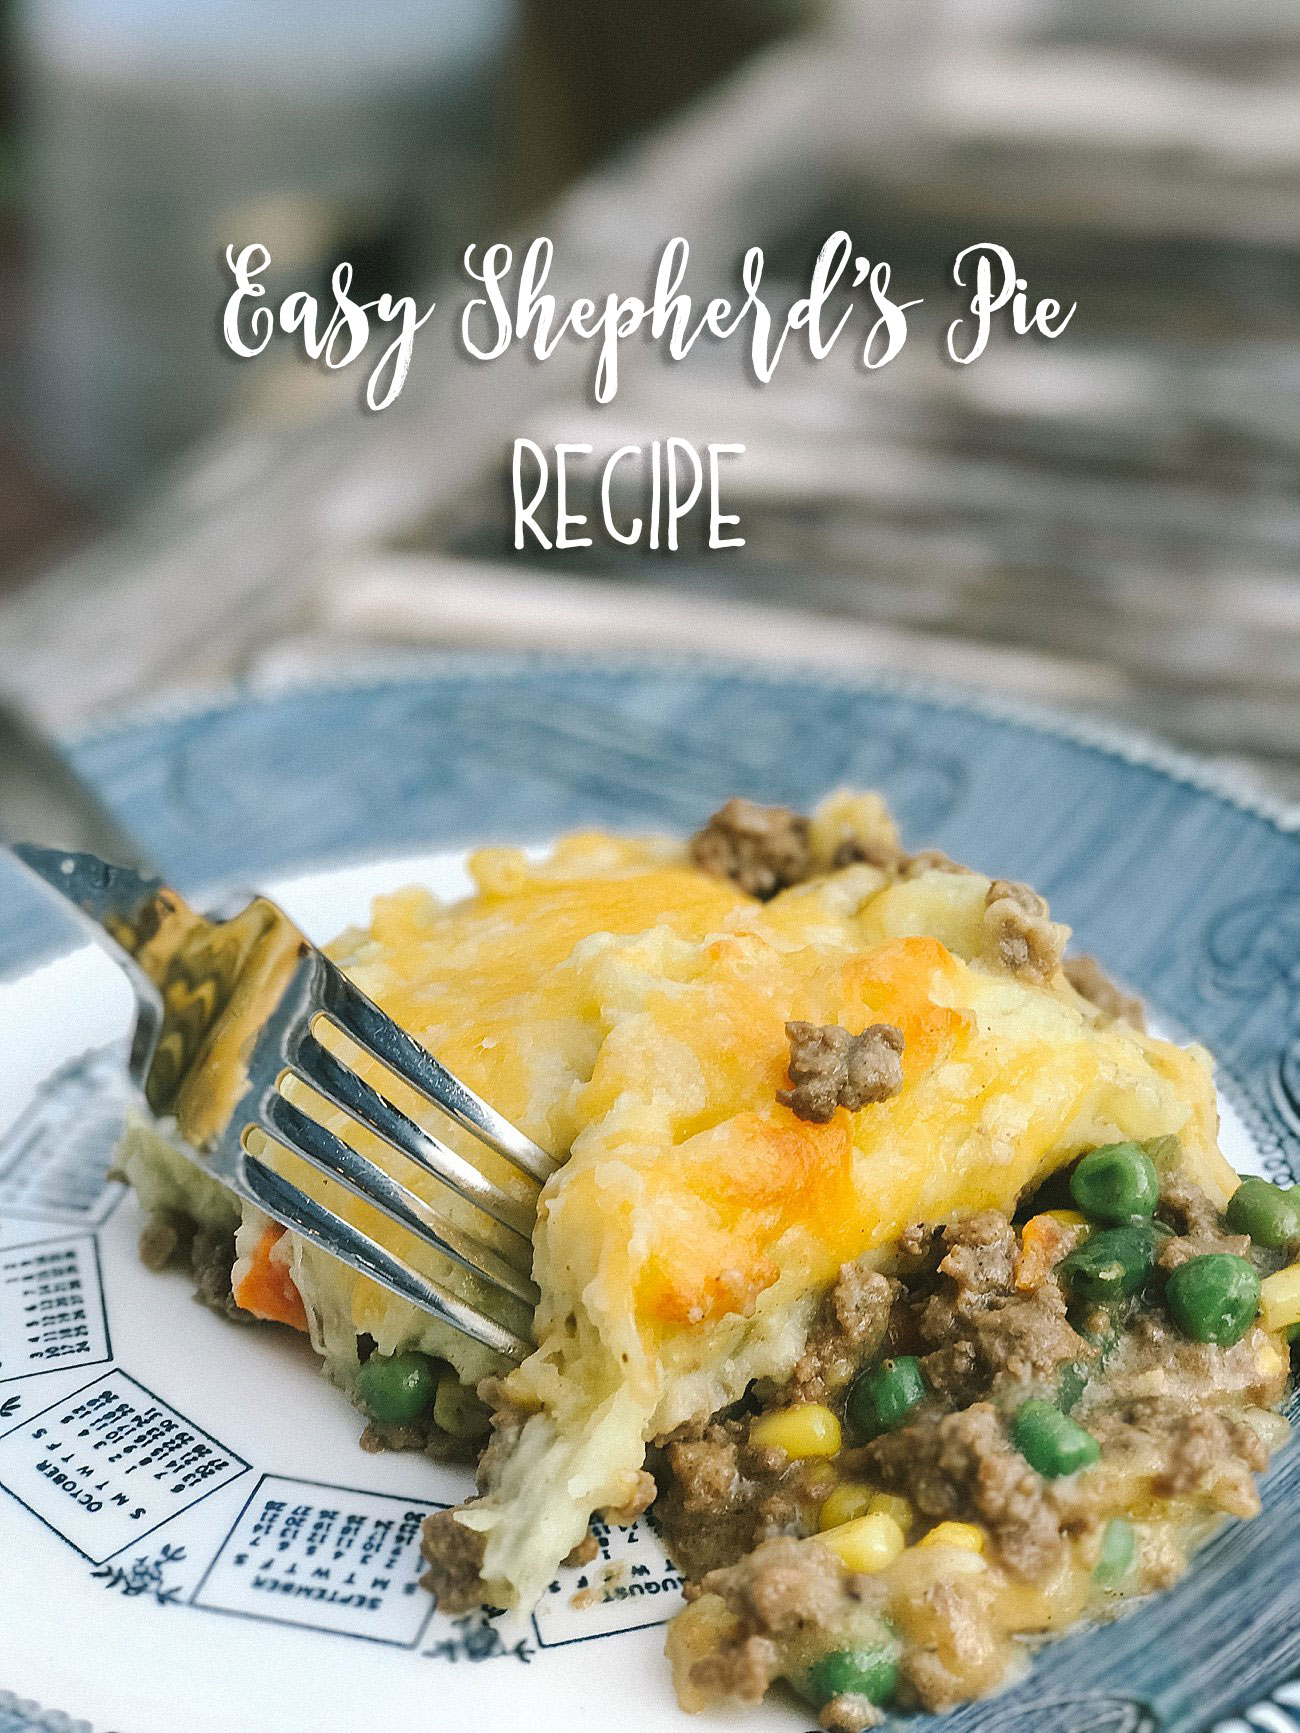 Best Shepherds Pie Recipe by lifestyle blogger Still Being Molly